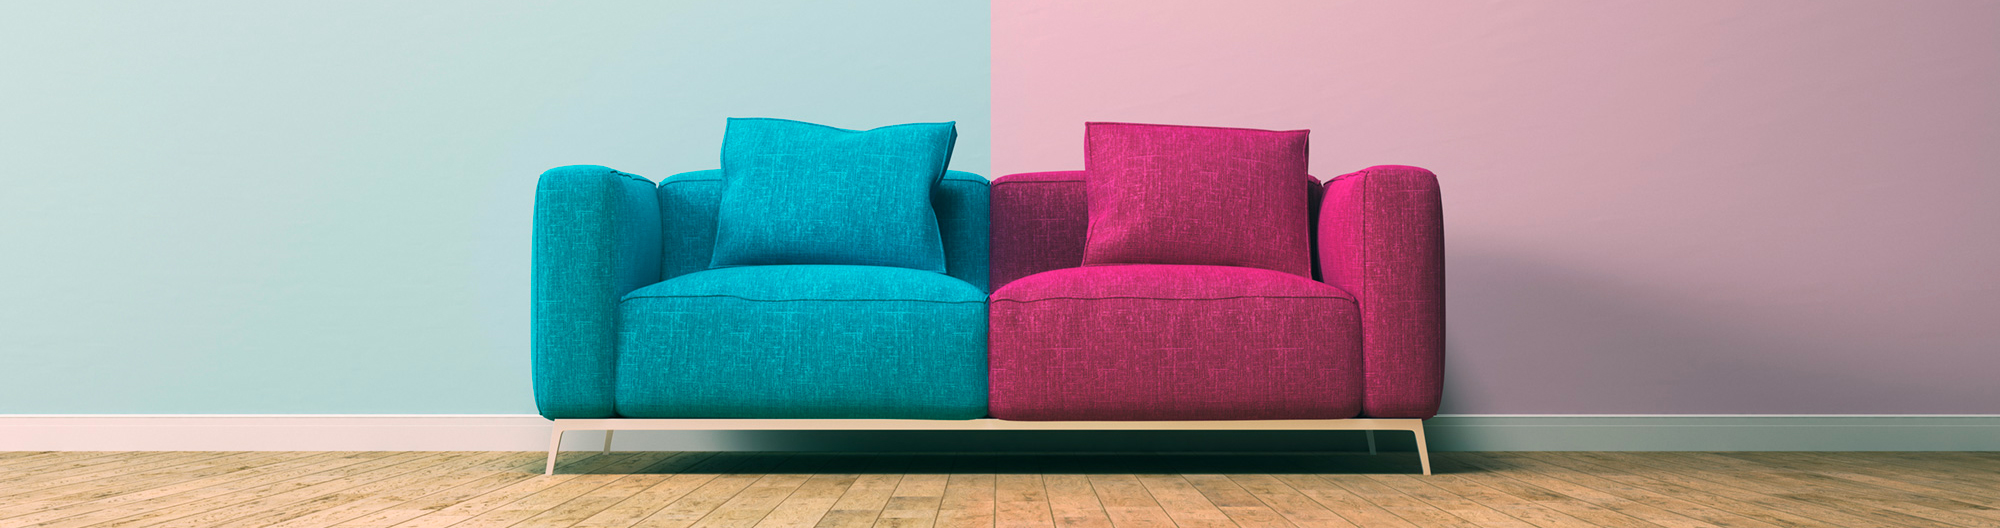 Divorce - Couch divided by color